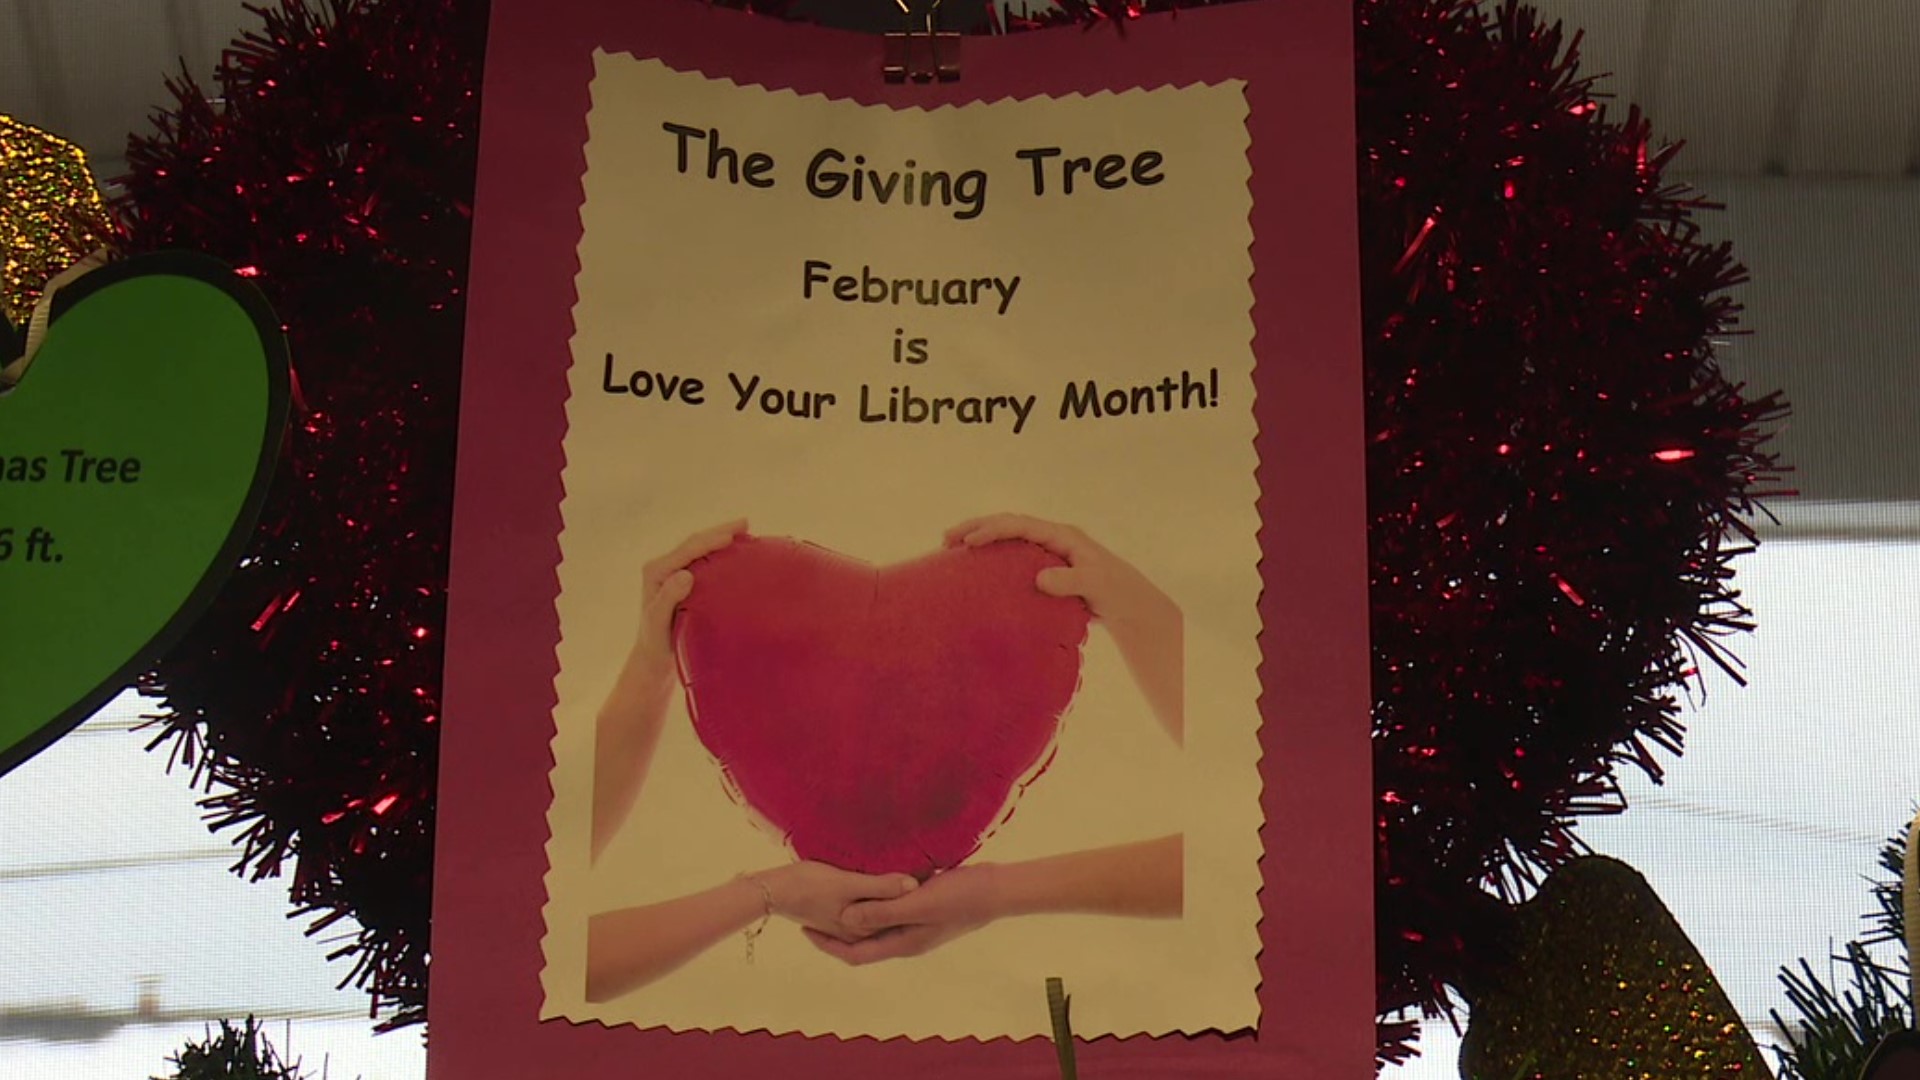 Community libraries across the country are asking for one simple thing during the month of February - a little love.